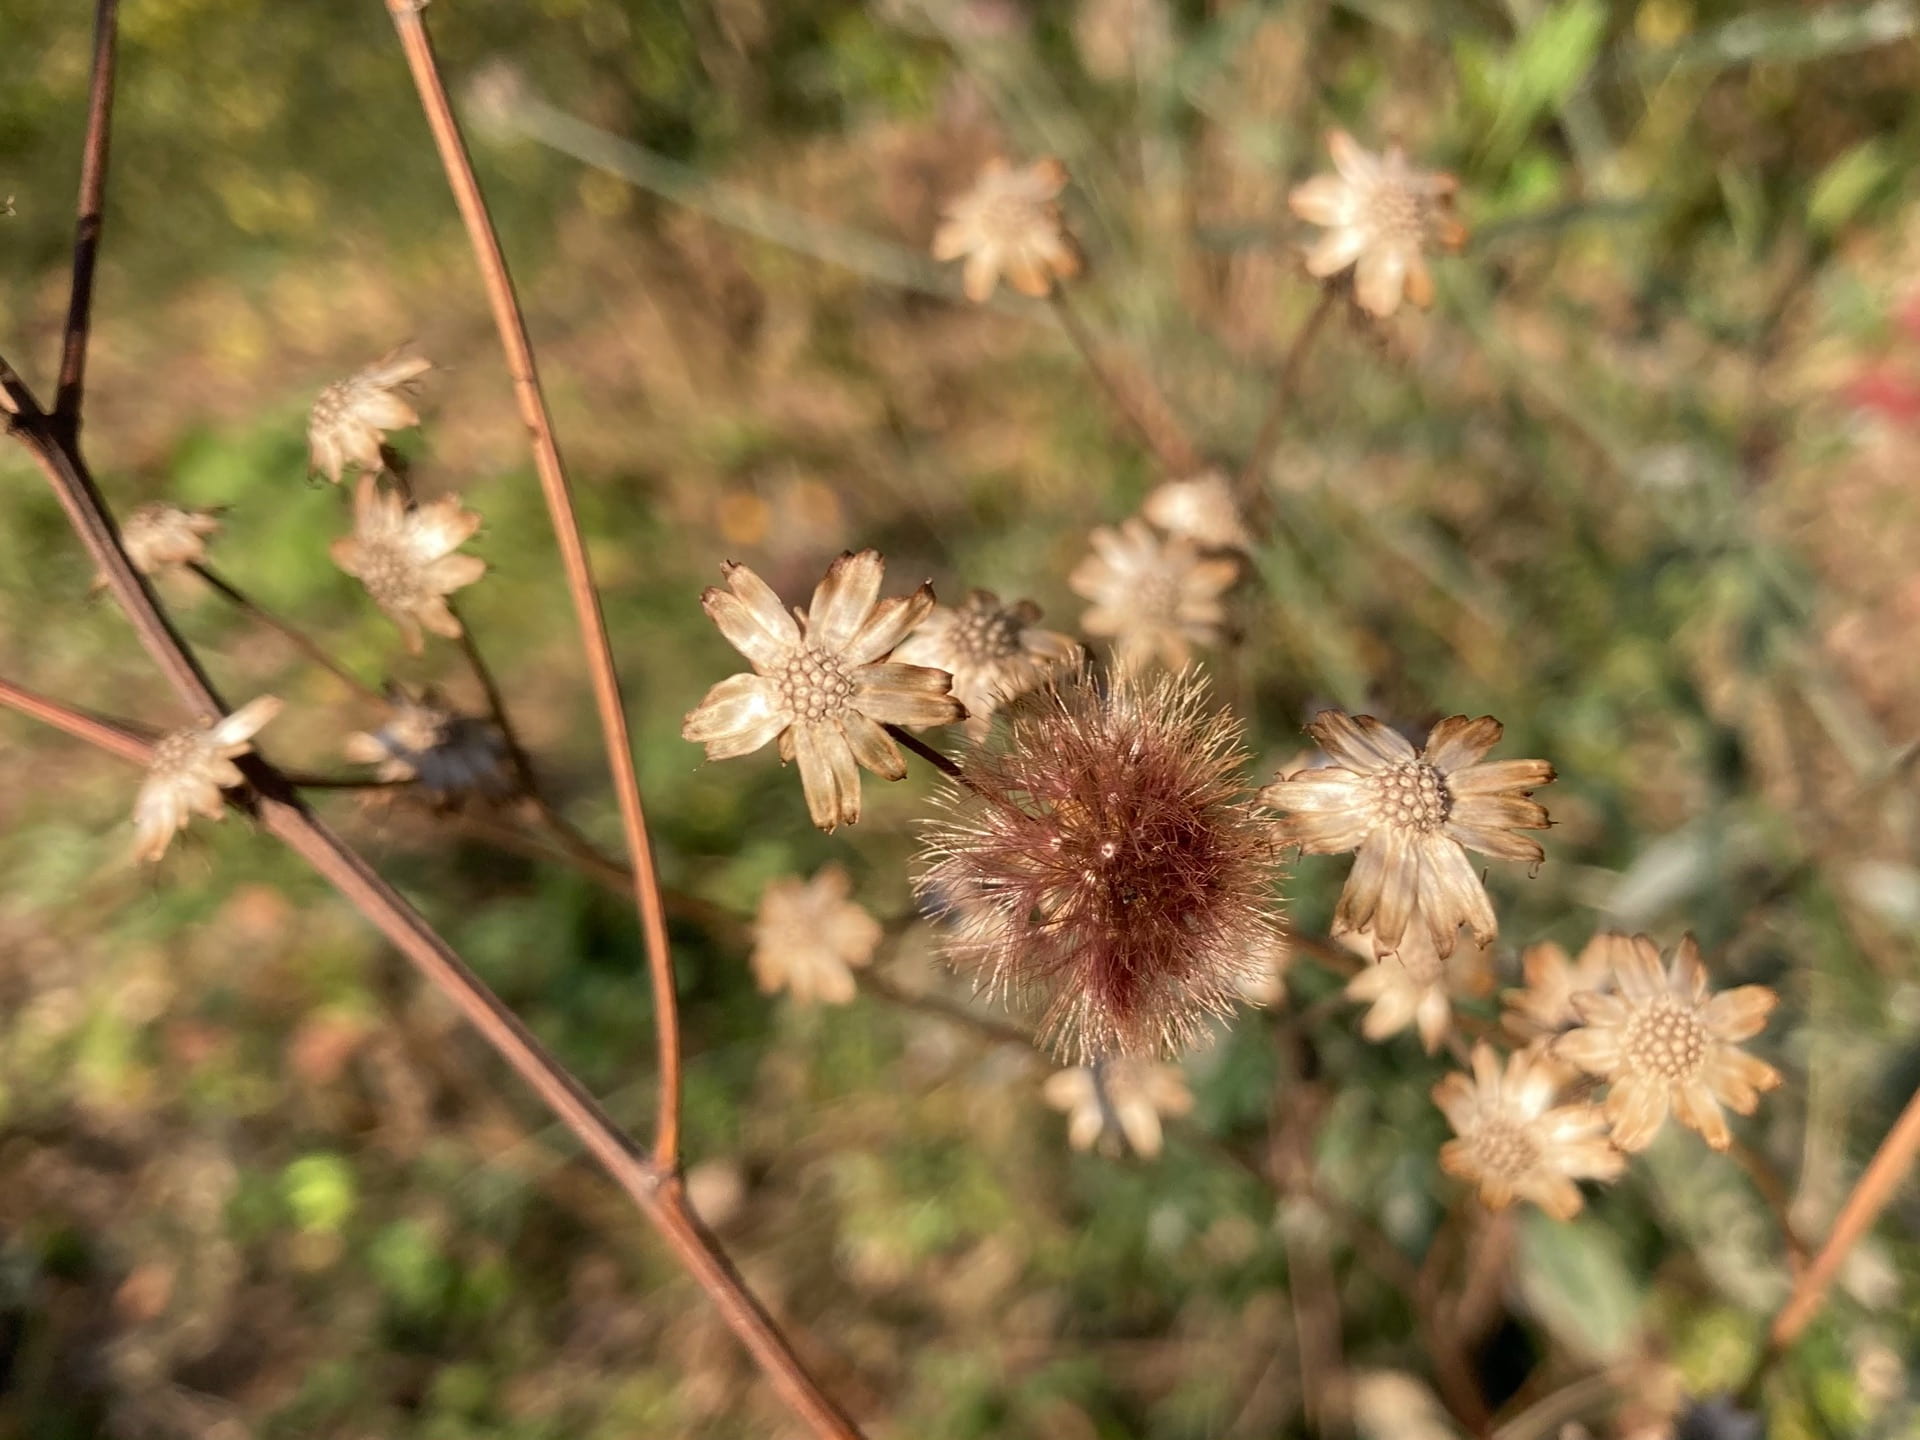 The seed heads of Vernonia noveboracensis look like small brown flowers themselves.